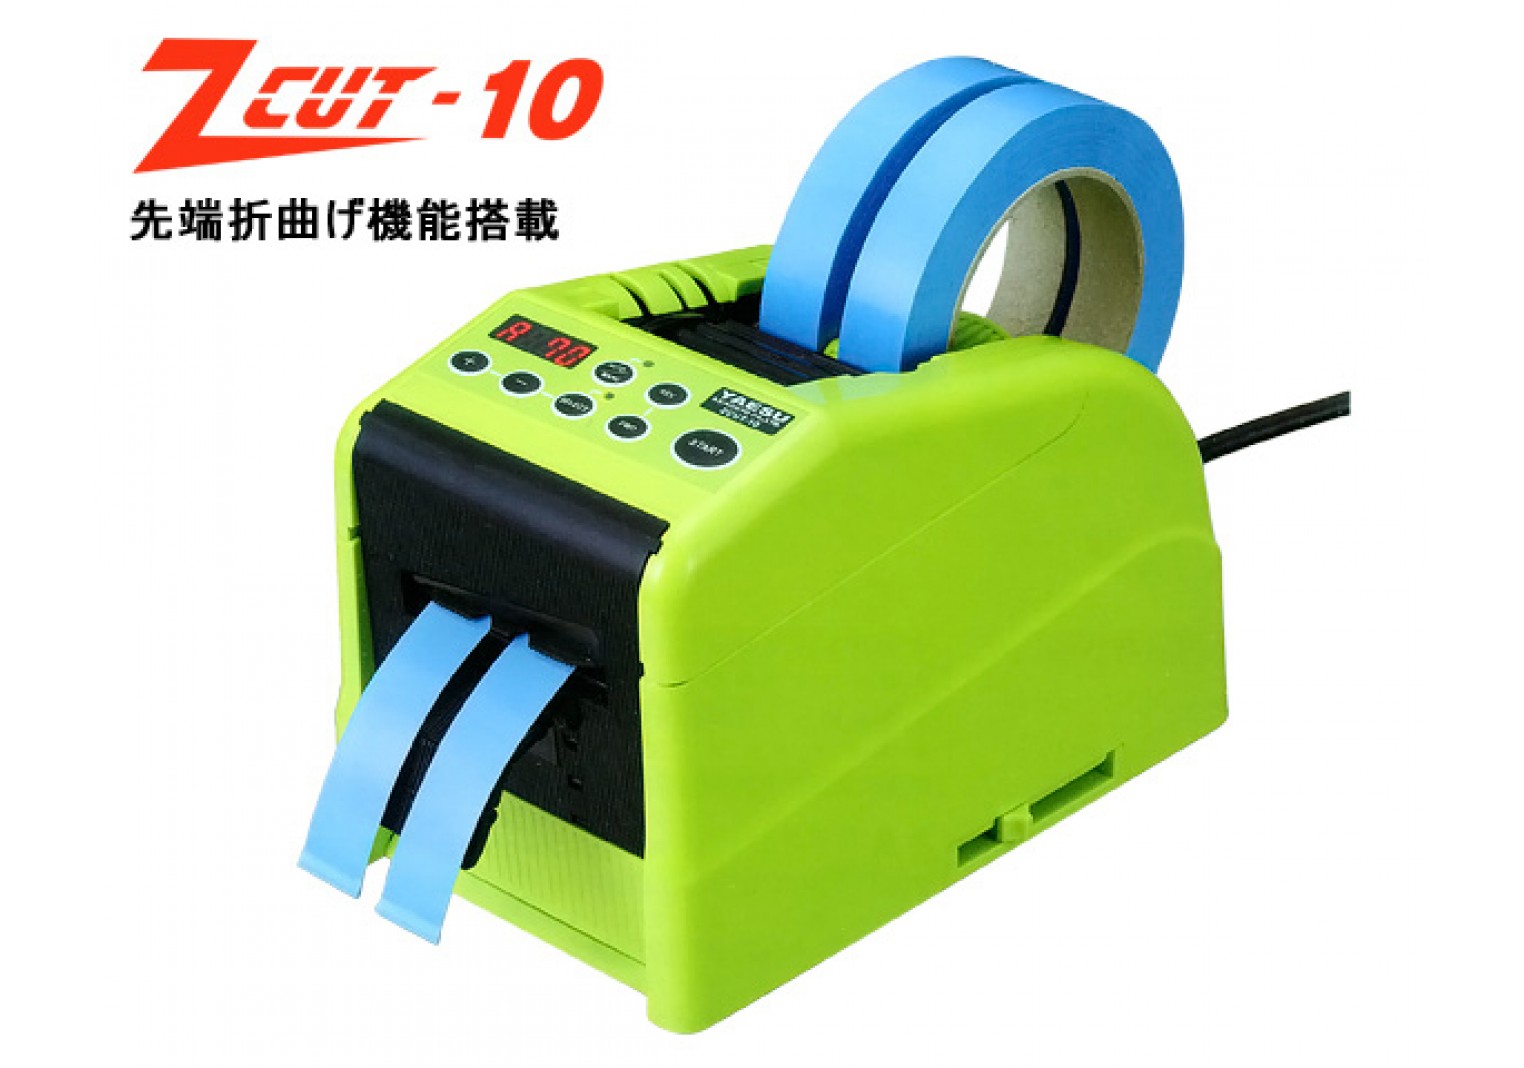 ZCUT-10 Automatic Tape Dispenser